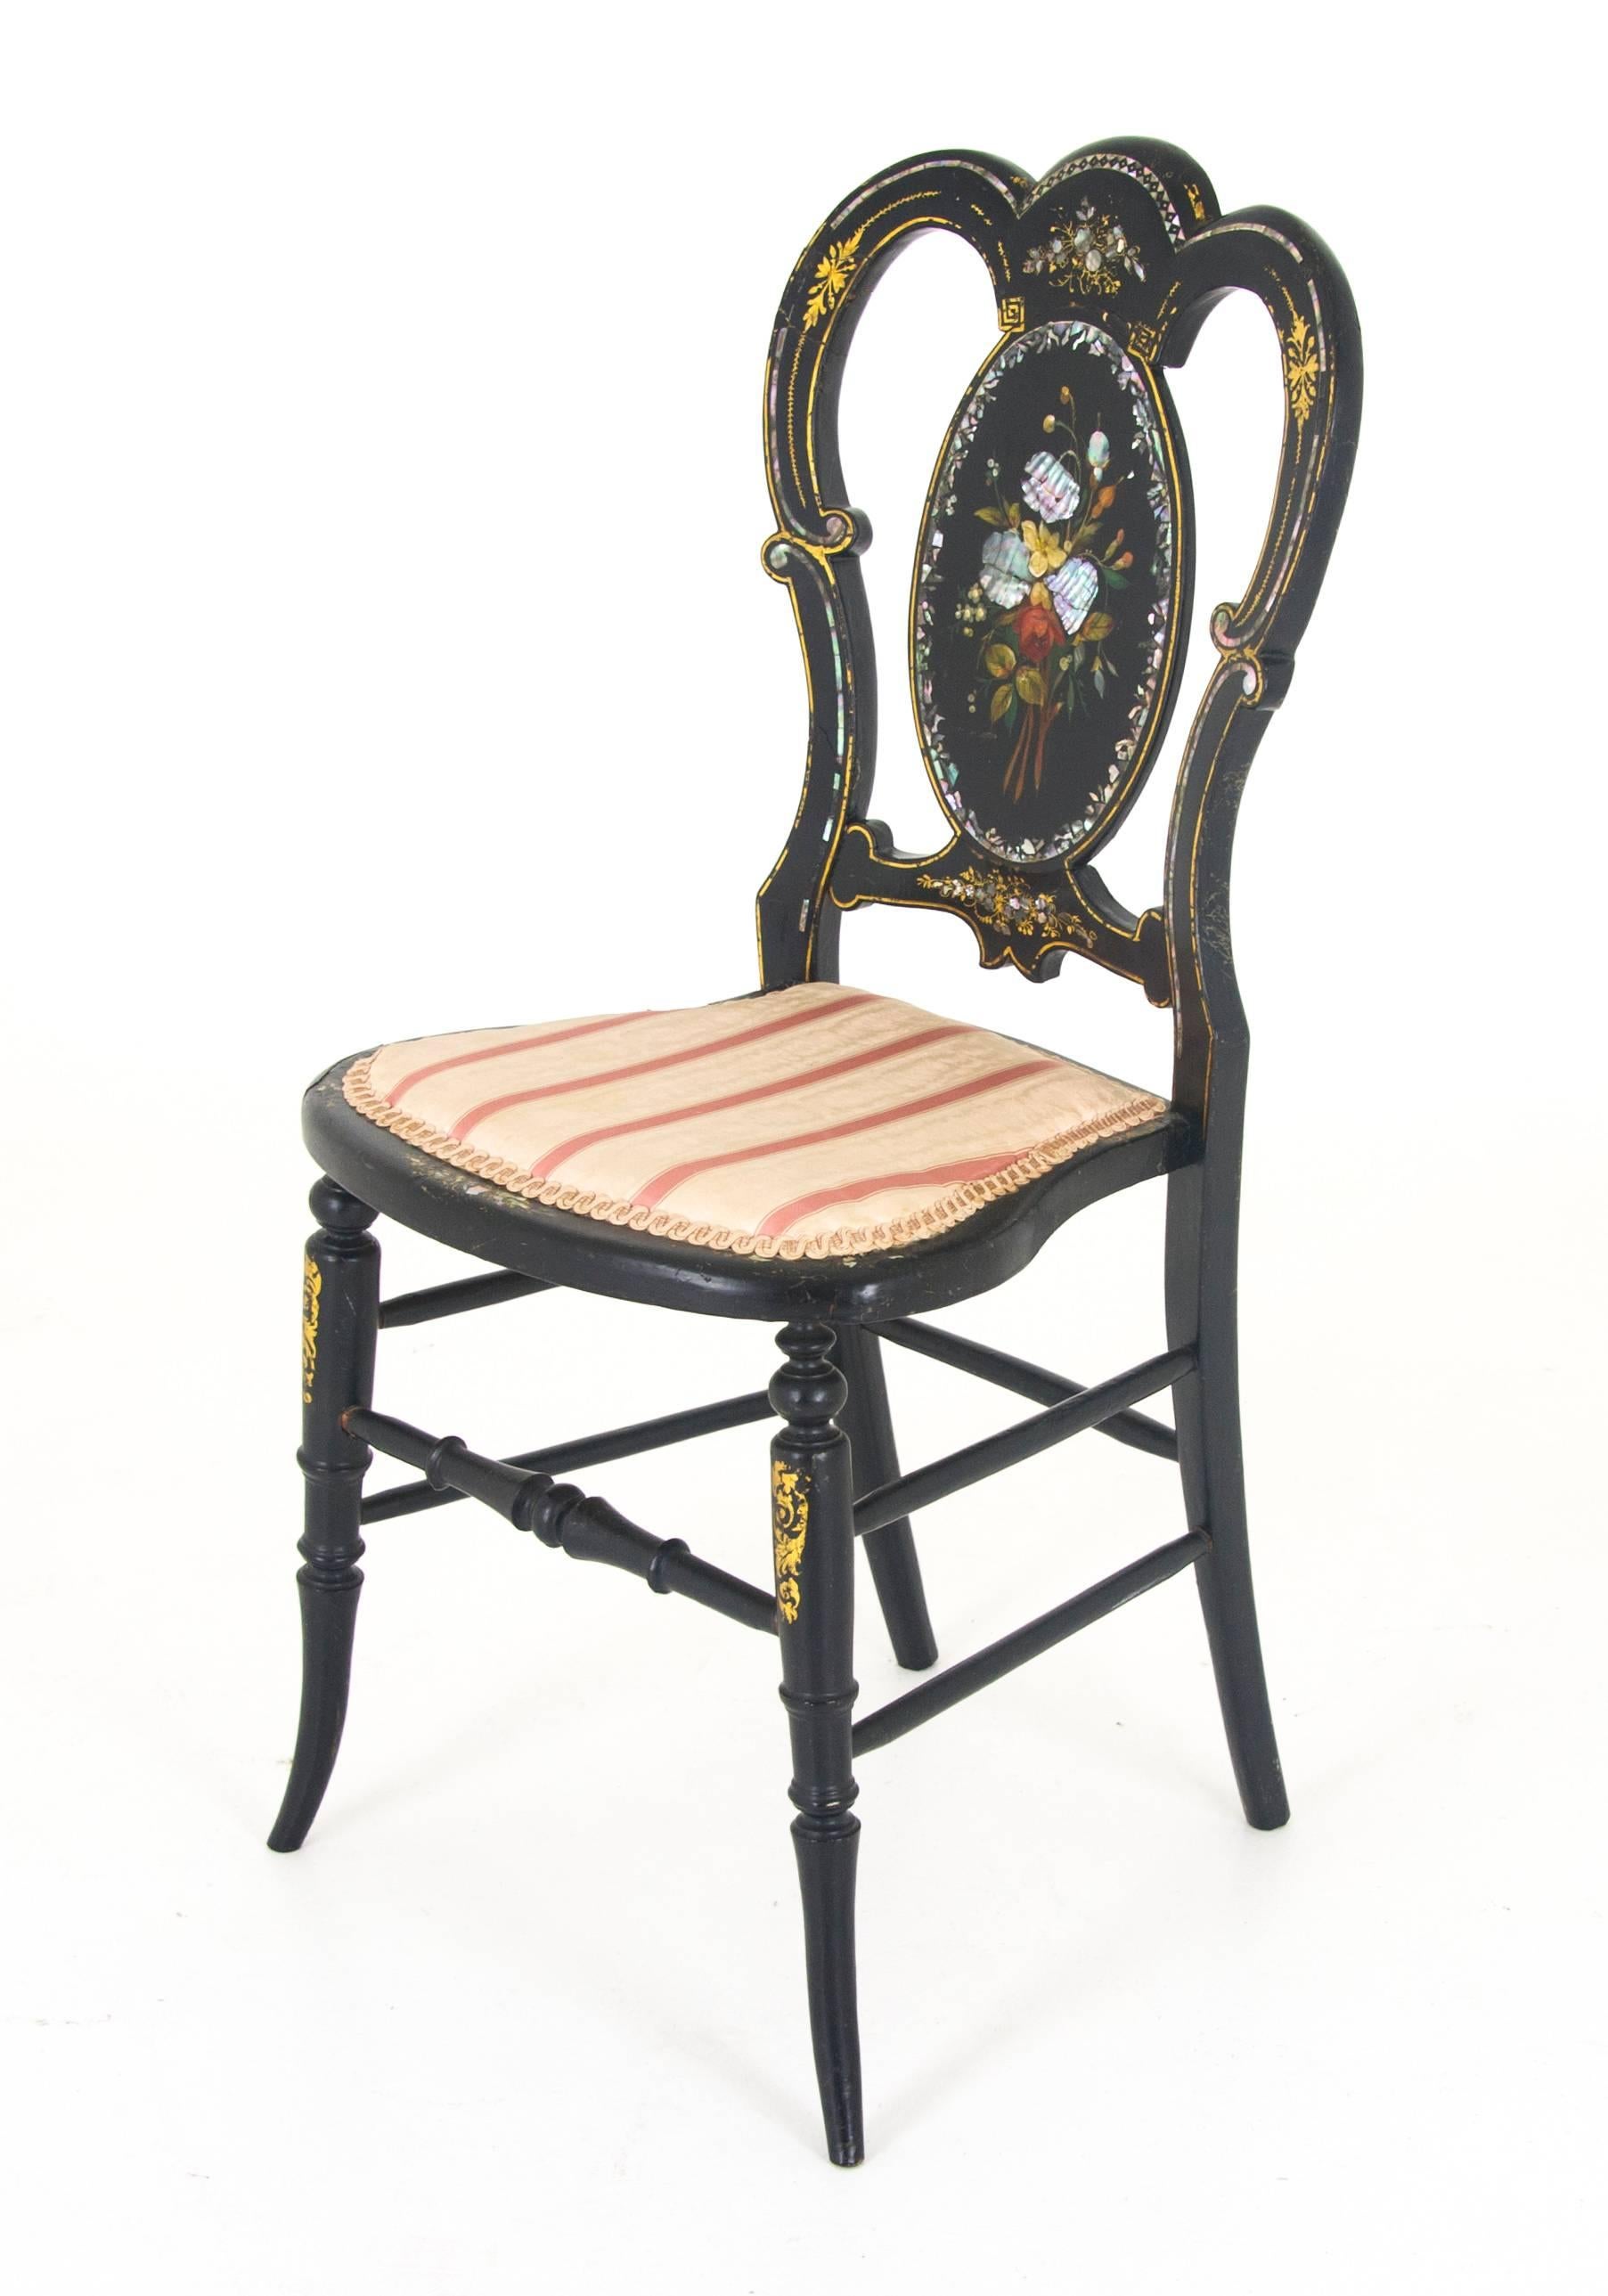 Antique Chair, Black Lacquered Chair, Victorian, England, 1870   REDUCED!! 1